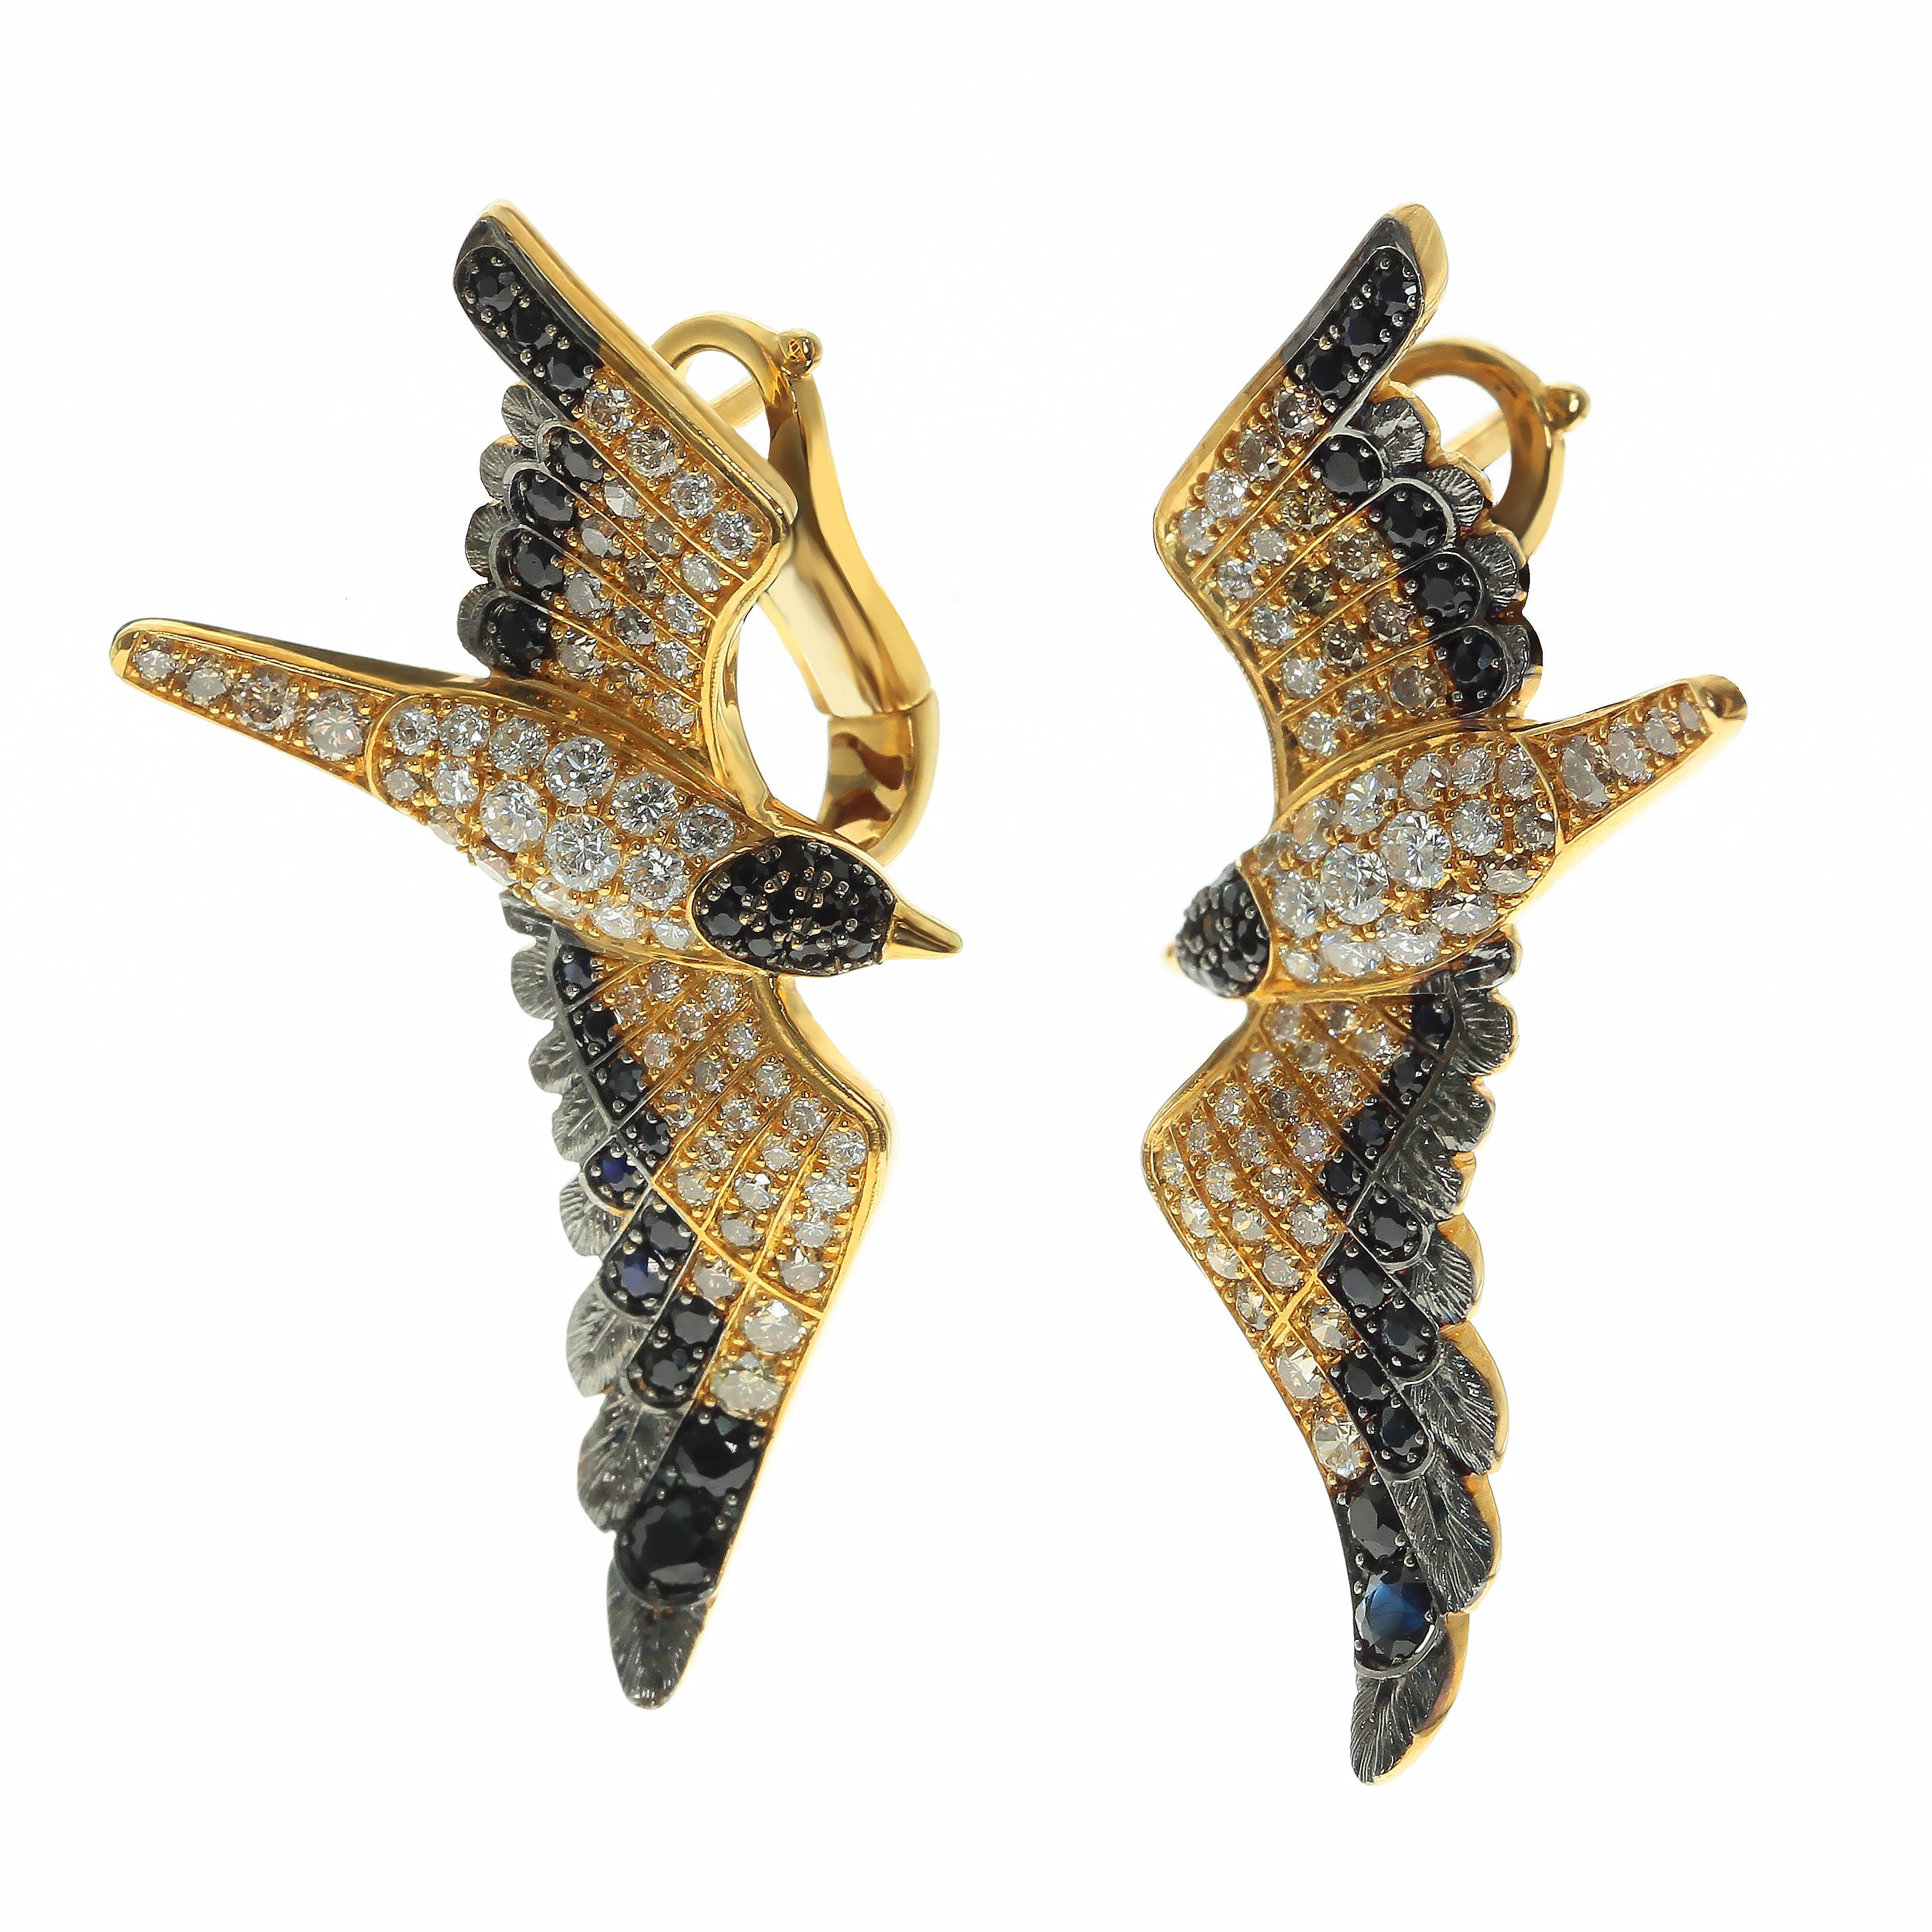 White and Brown Diamonds Black Sapphire 18 Karat Yellow Gold Seagull Earrings
Highly detailed Seagull Earrings. Combination of White and Champagne Diamonds gives fully impression that they are alive. If you miss the filling of light ocean breeze,